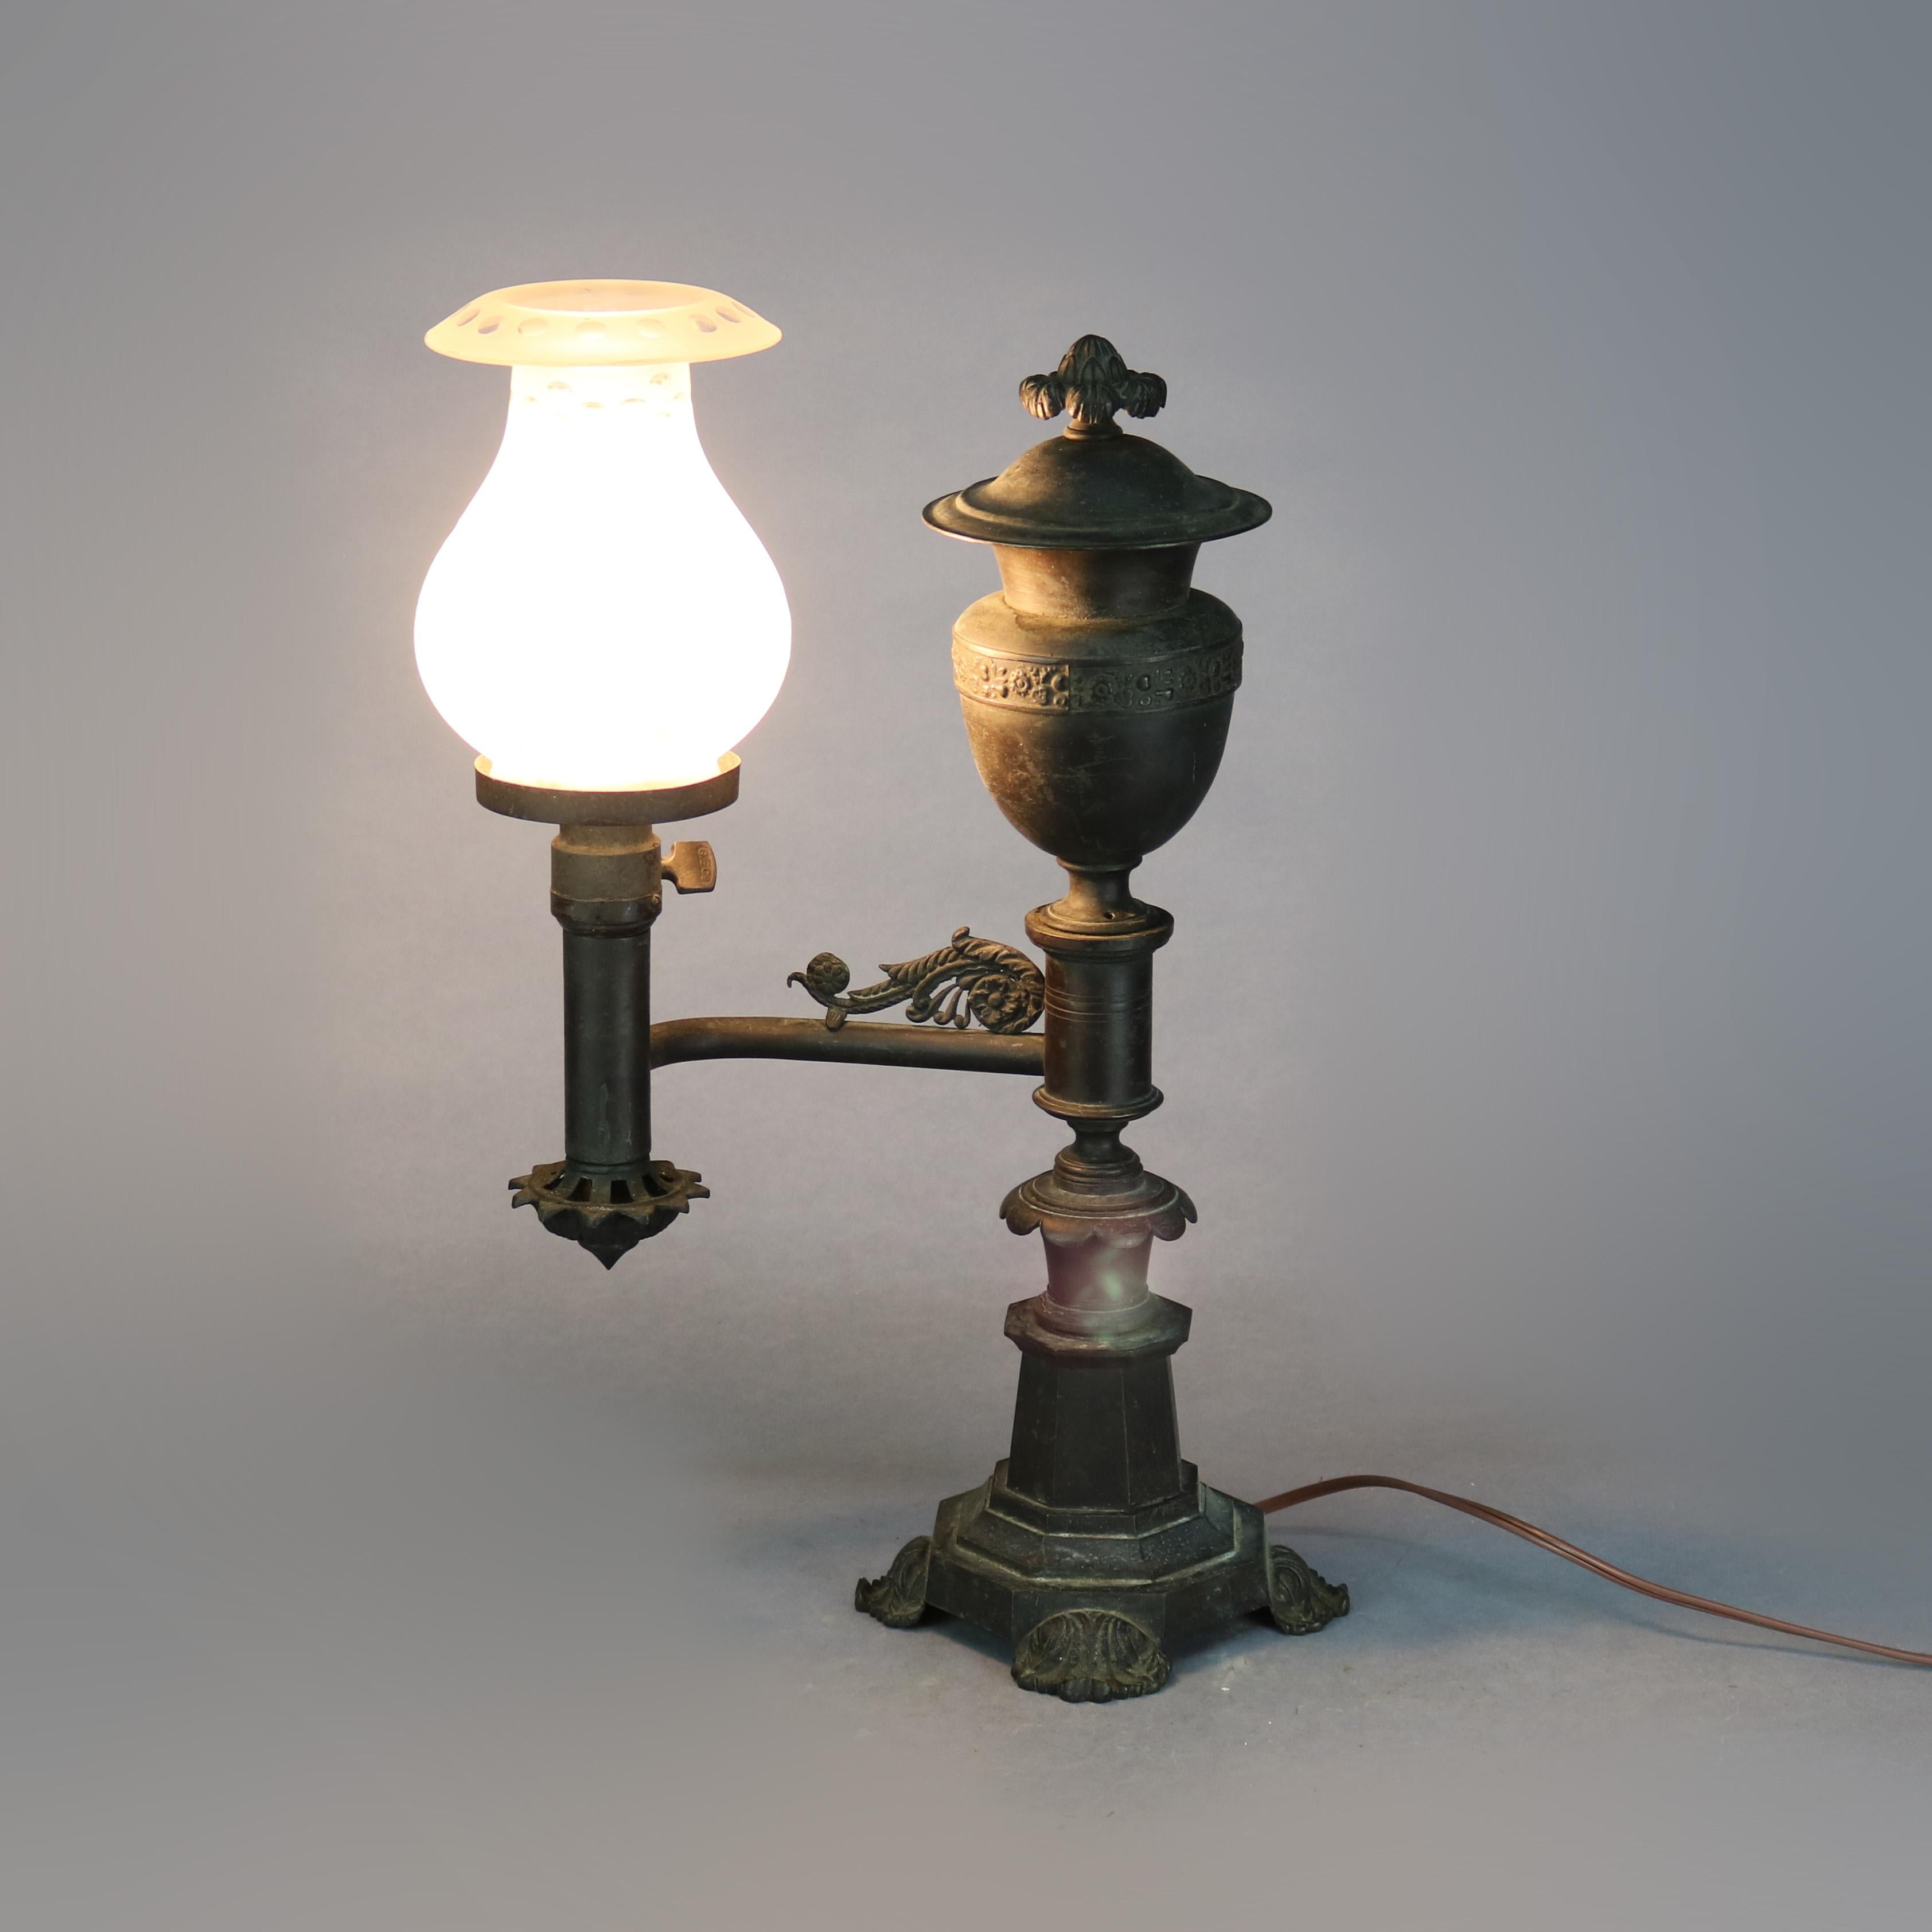 American Antique Bronze Argand Student Lamp & Shade, Electrified, Circa 1820